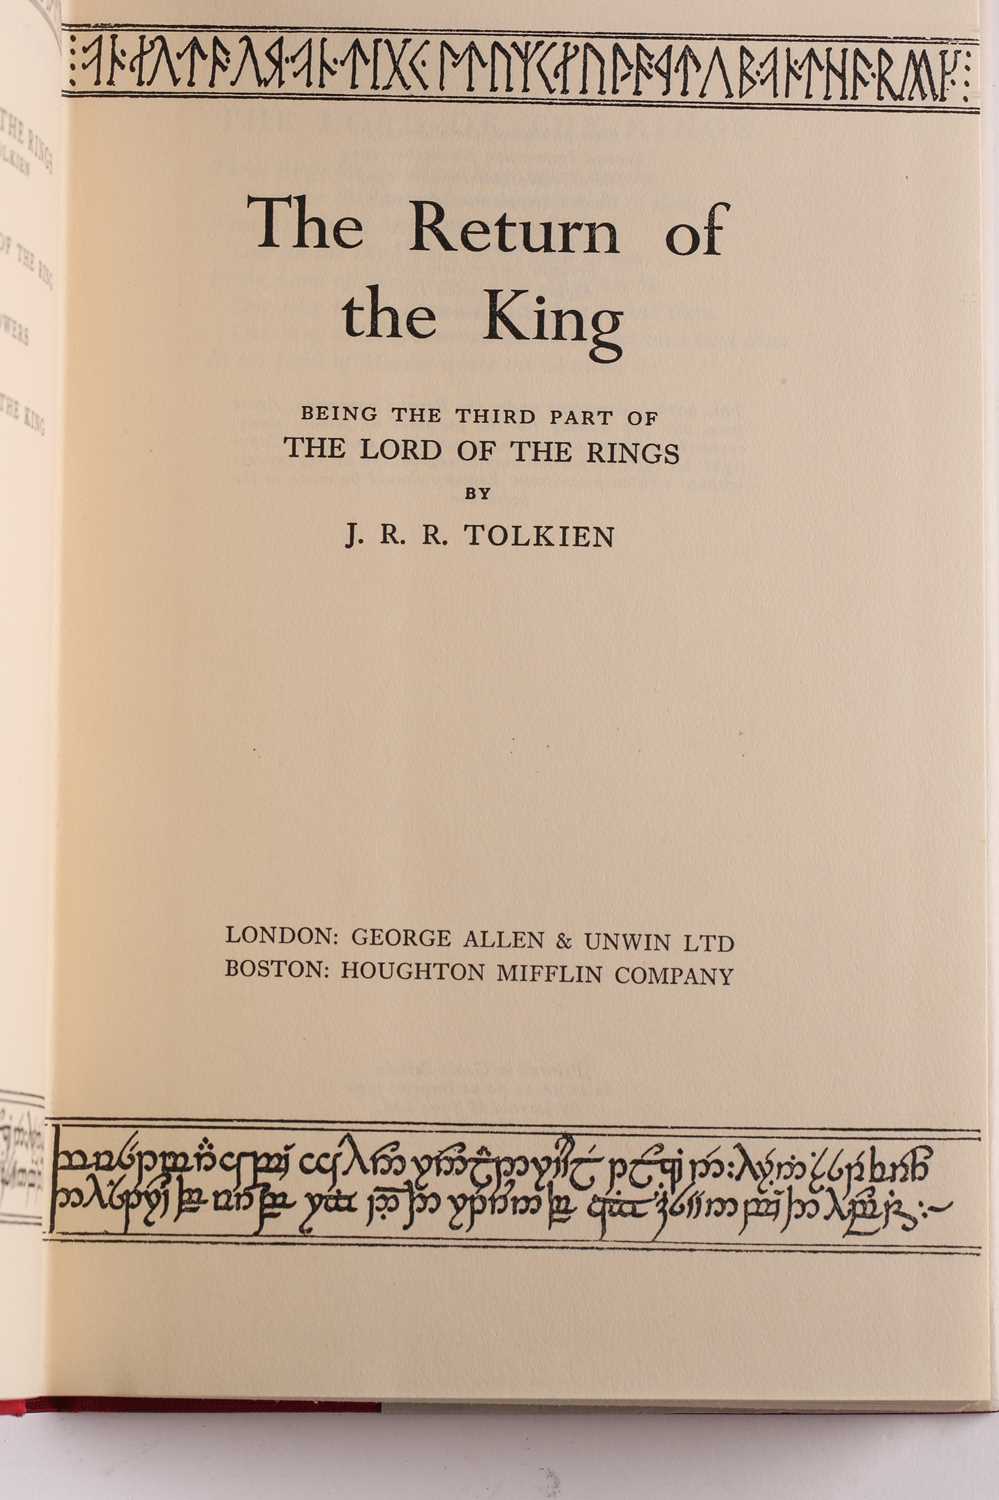 Tolkien (J.R.R.) The Lord of the Rings, 3 volumes in a slip case, George Allen & Unwin Ltd, 'The - Image 4 of 17